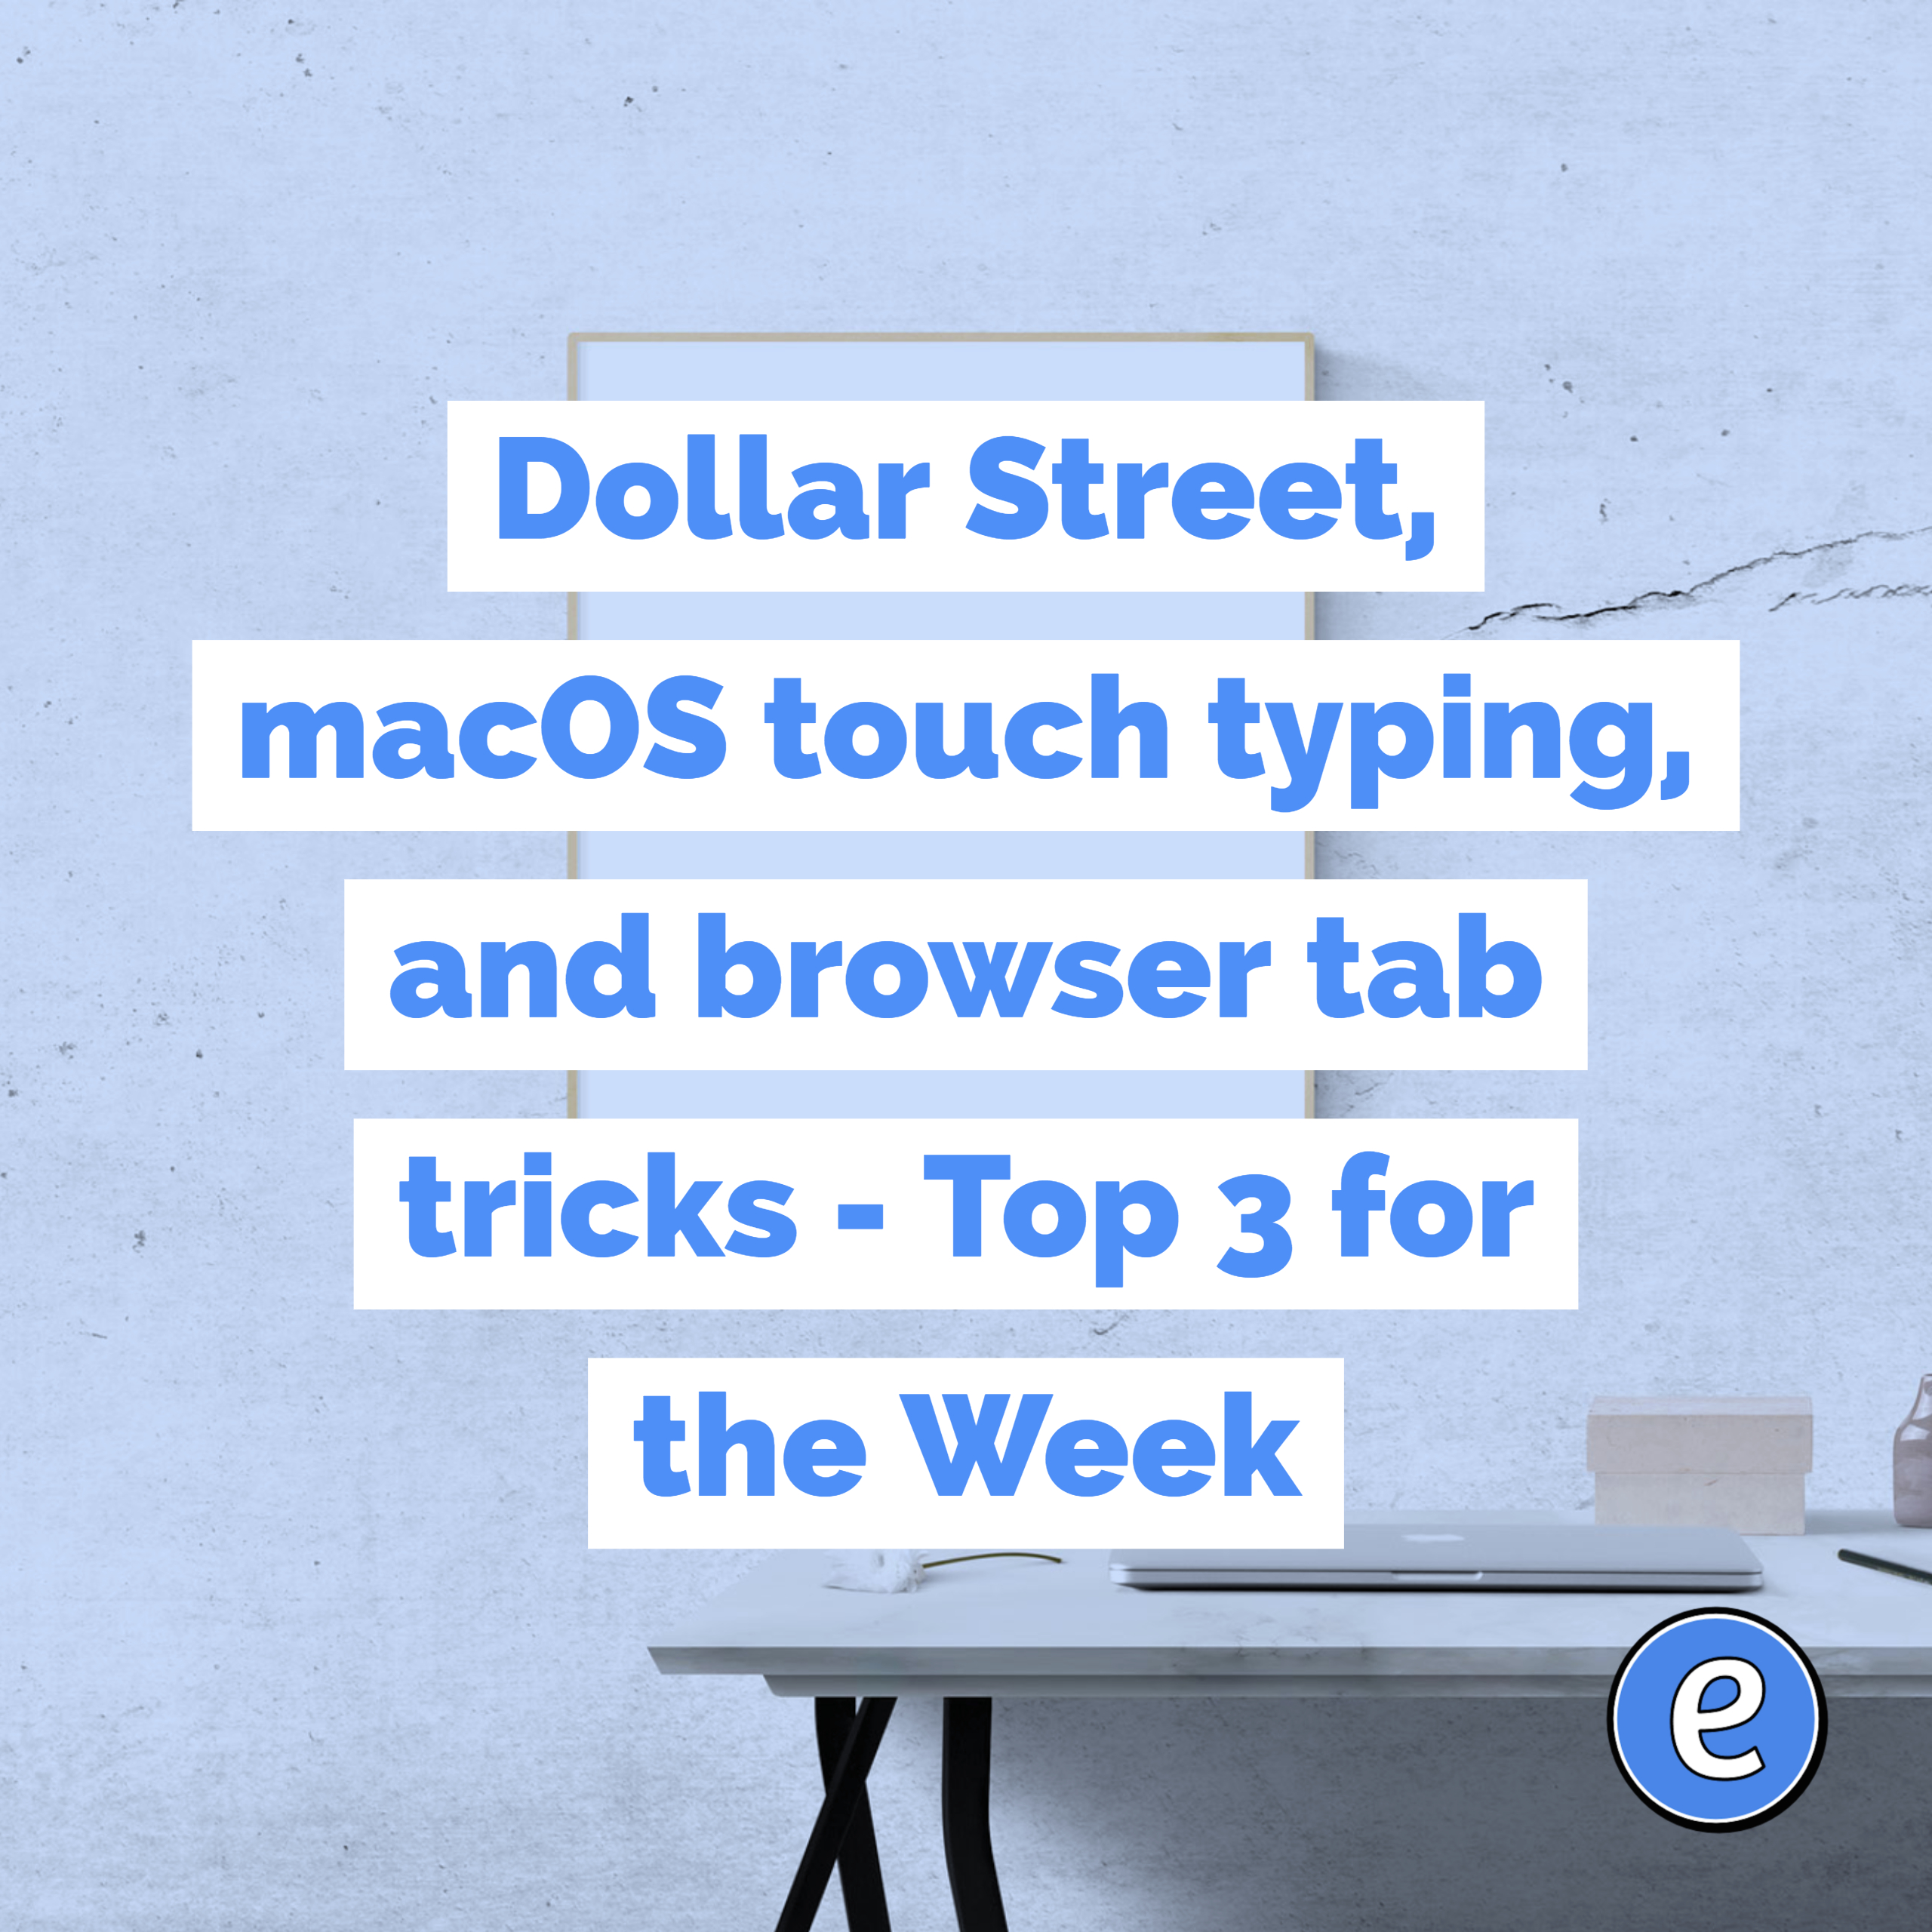 Dollar Street, macOS touch typing, and browser tab tricks – Top 3 for the Week